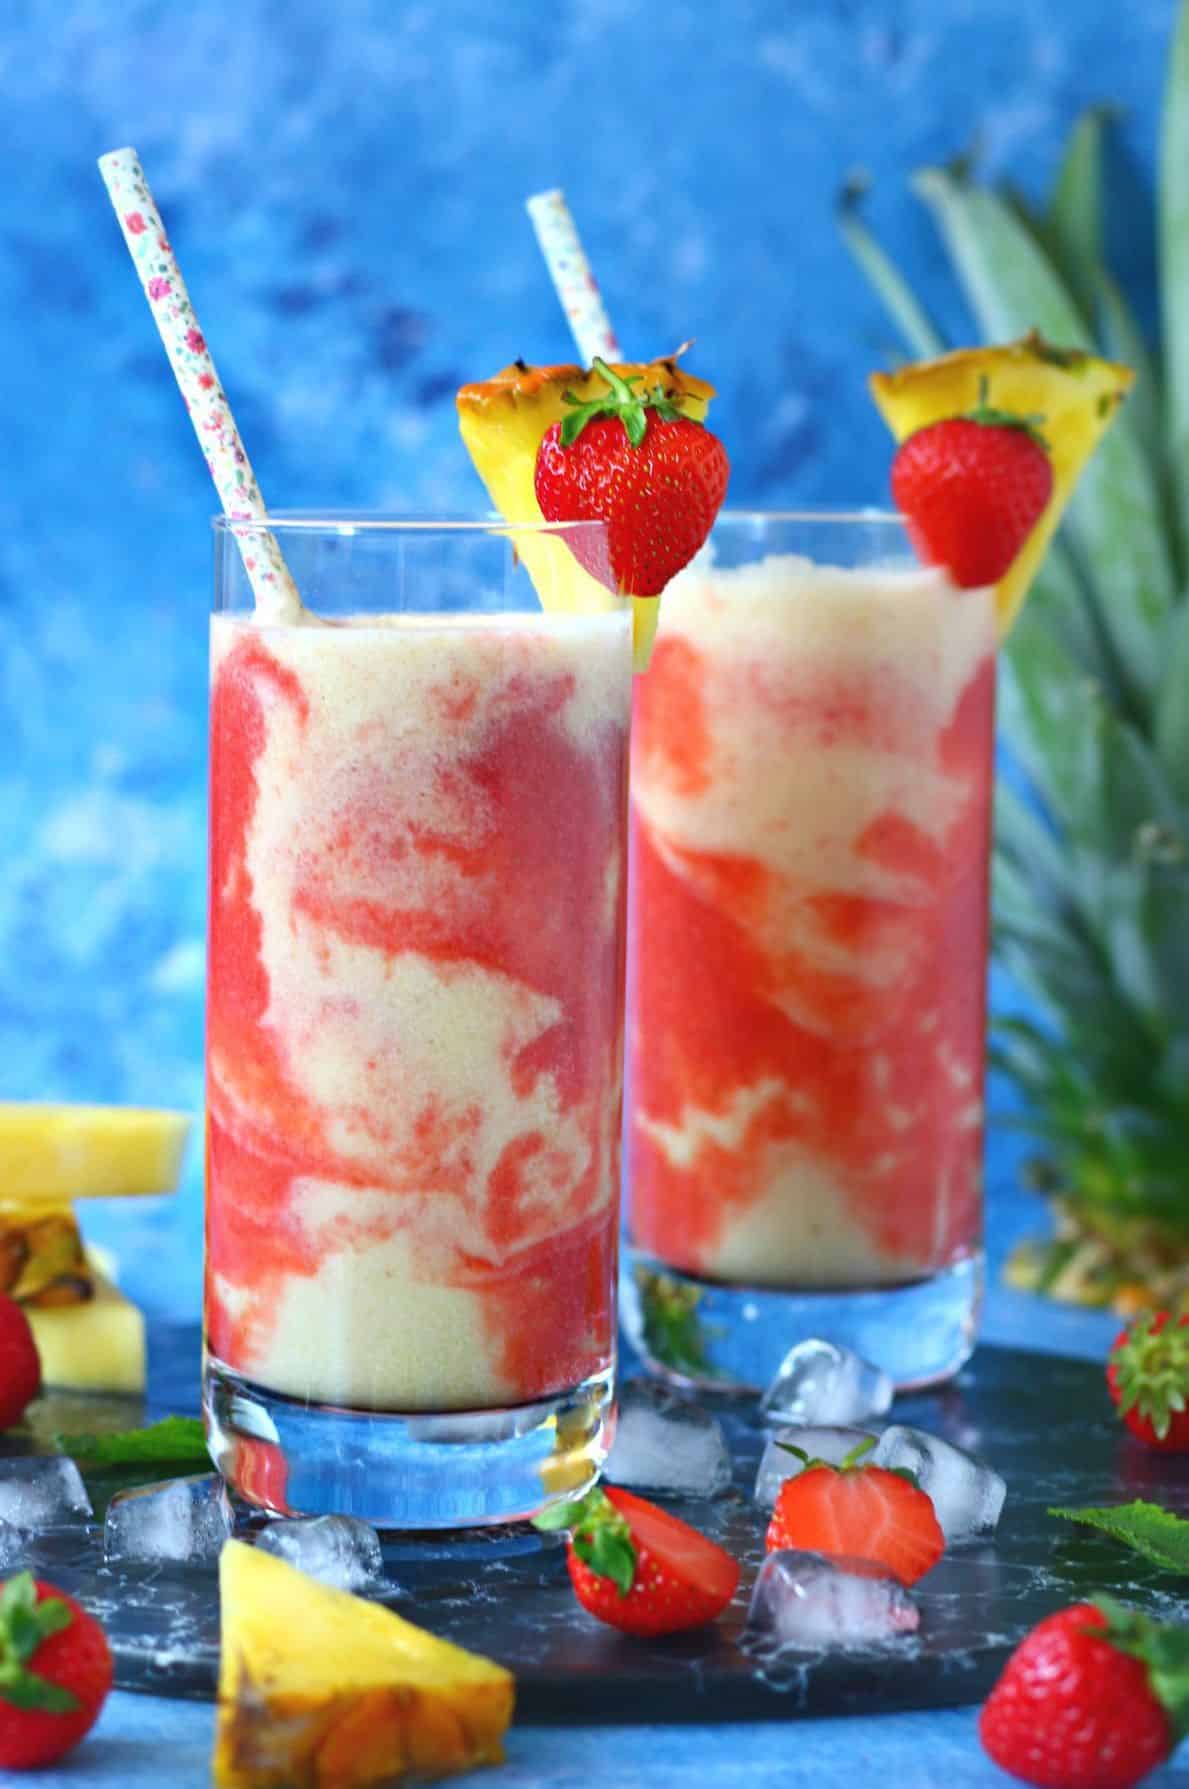 Strawberry Pina Colada with pineapple wedge and strawberry